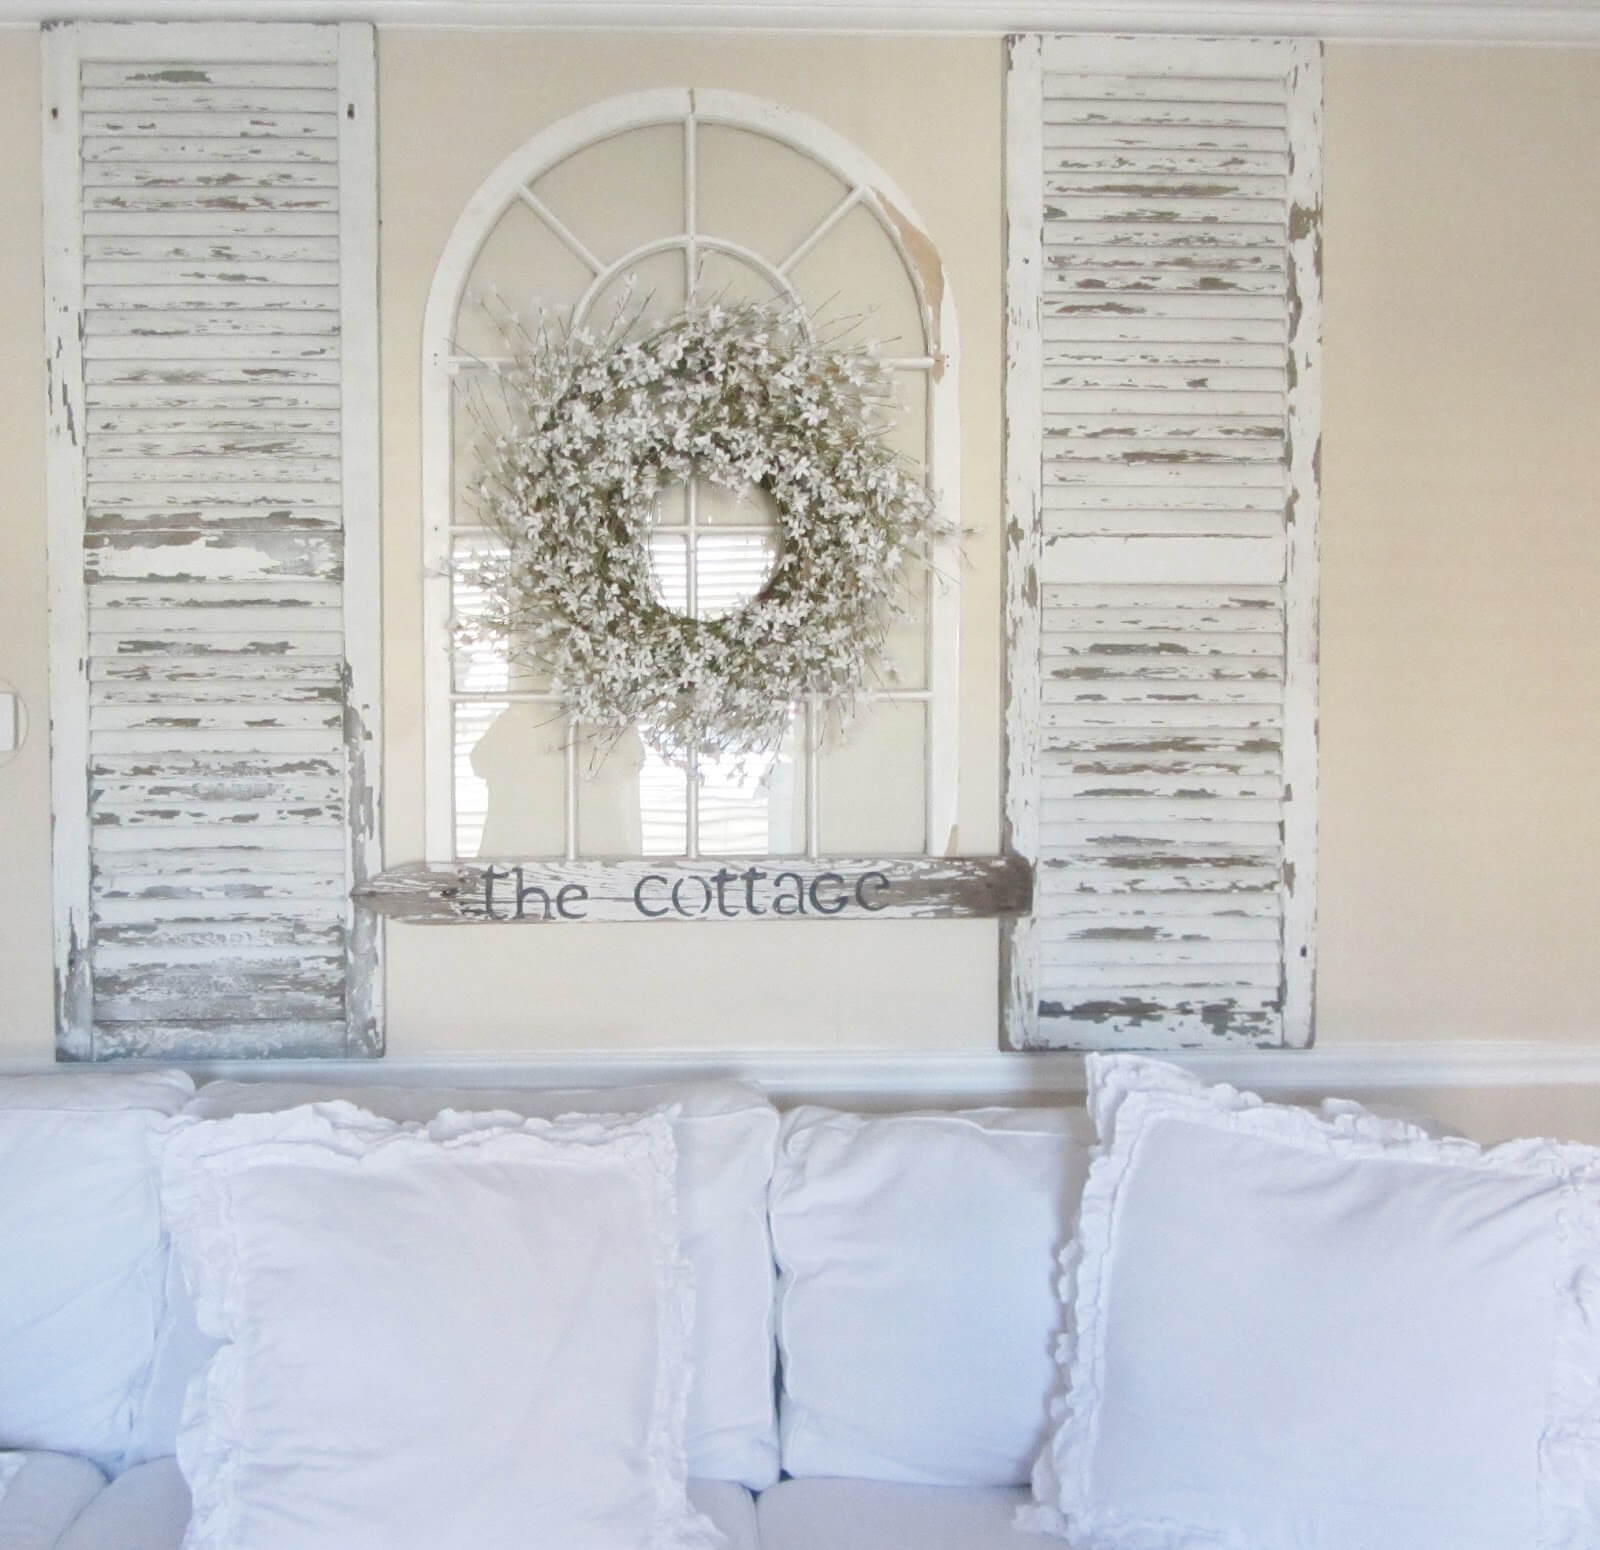 DIY Home Decor: 18 Ways to Repurpose Old Shutters